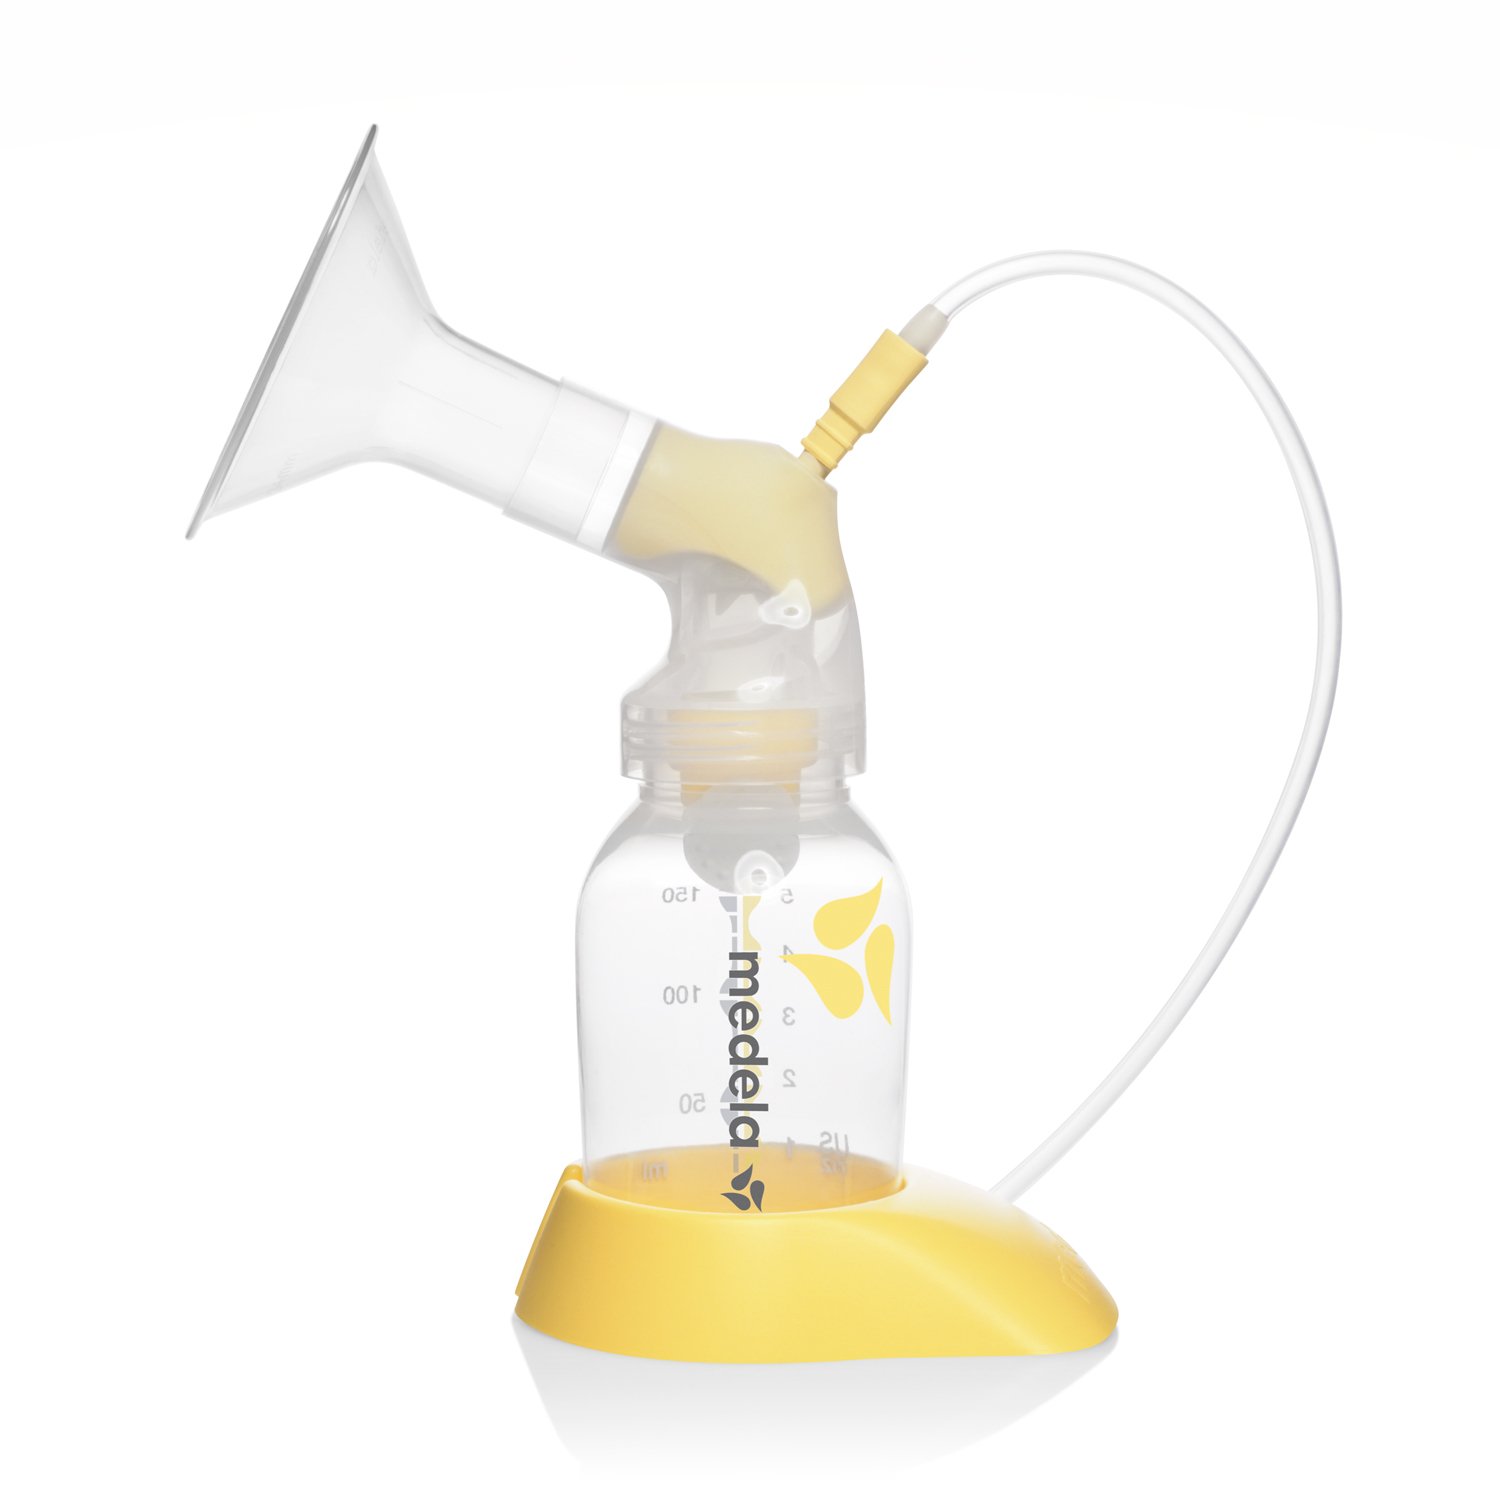 http://f.igtrend.kz/products/001/214/medela_molokootsos_swing_2.jpg